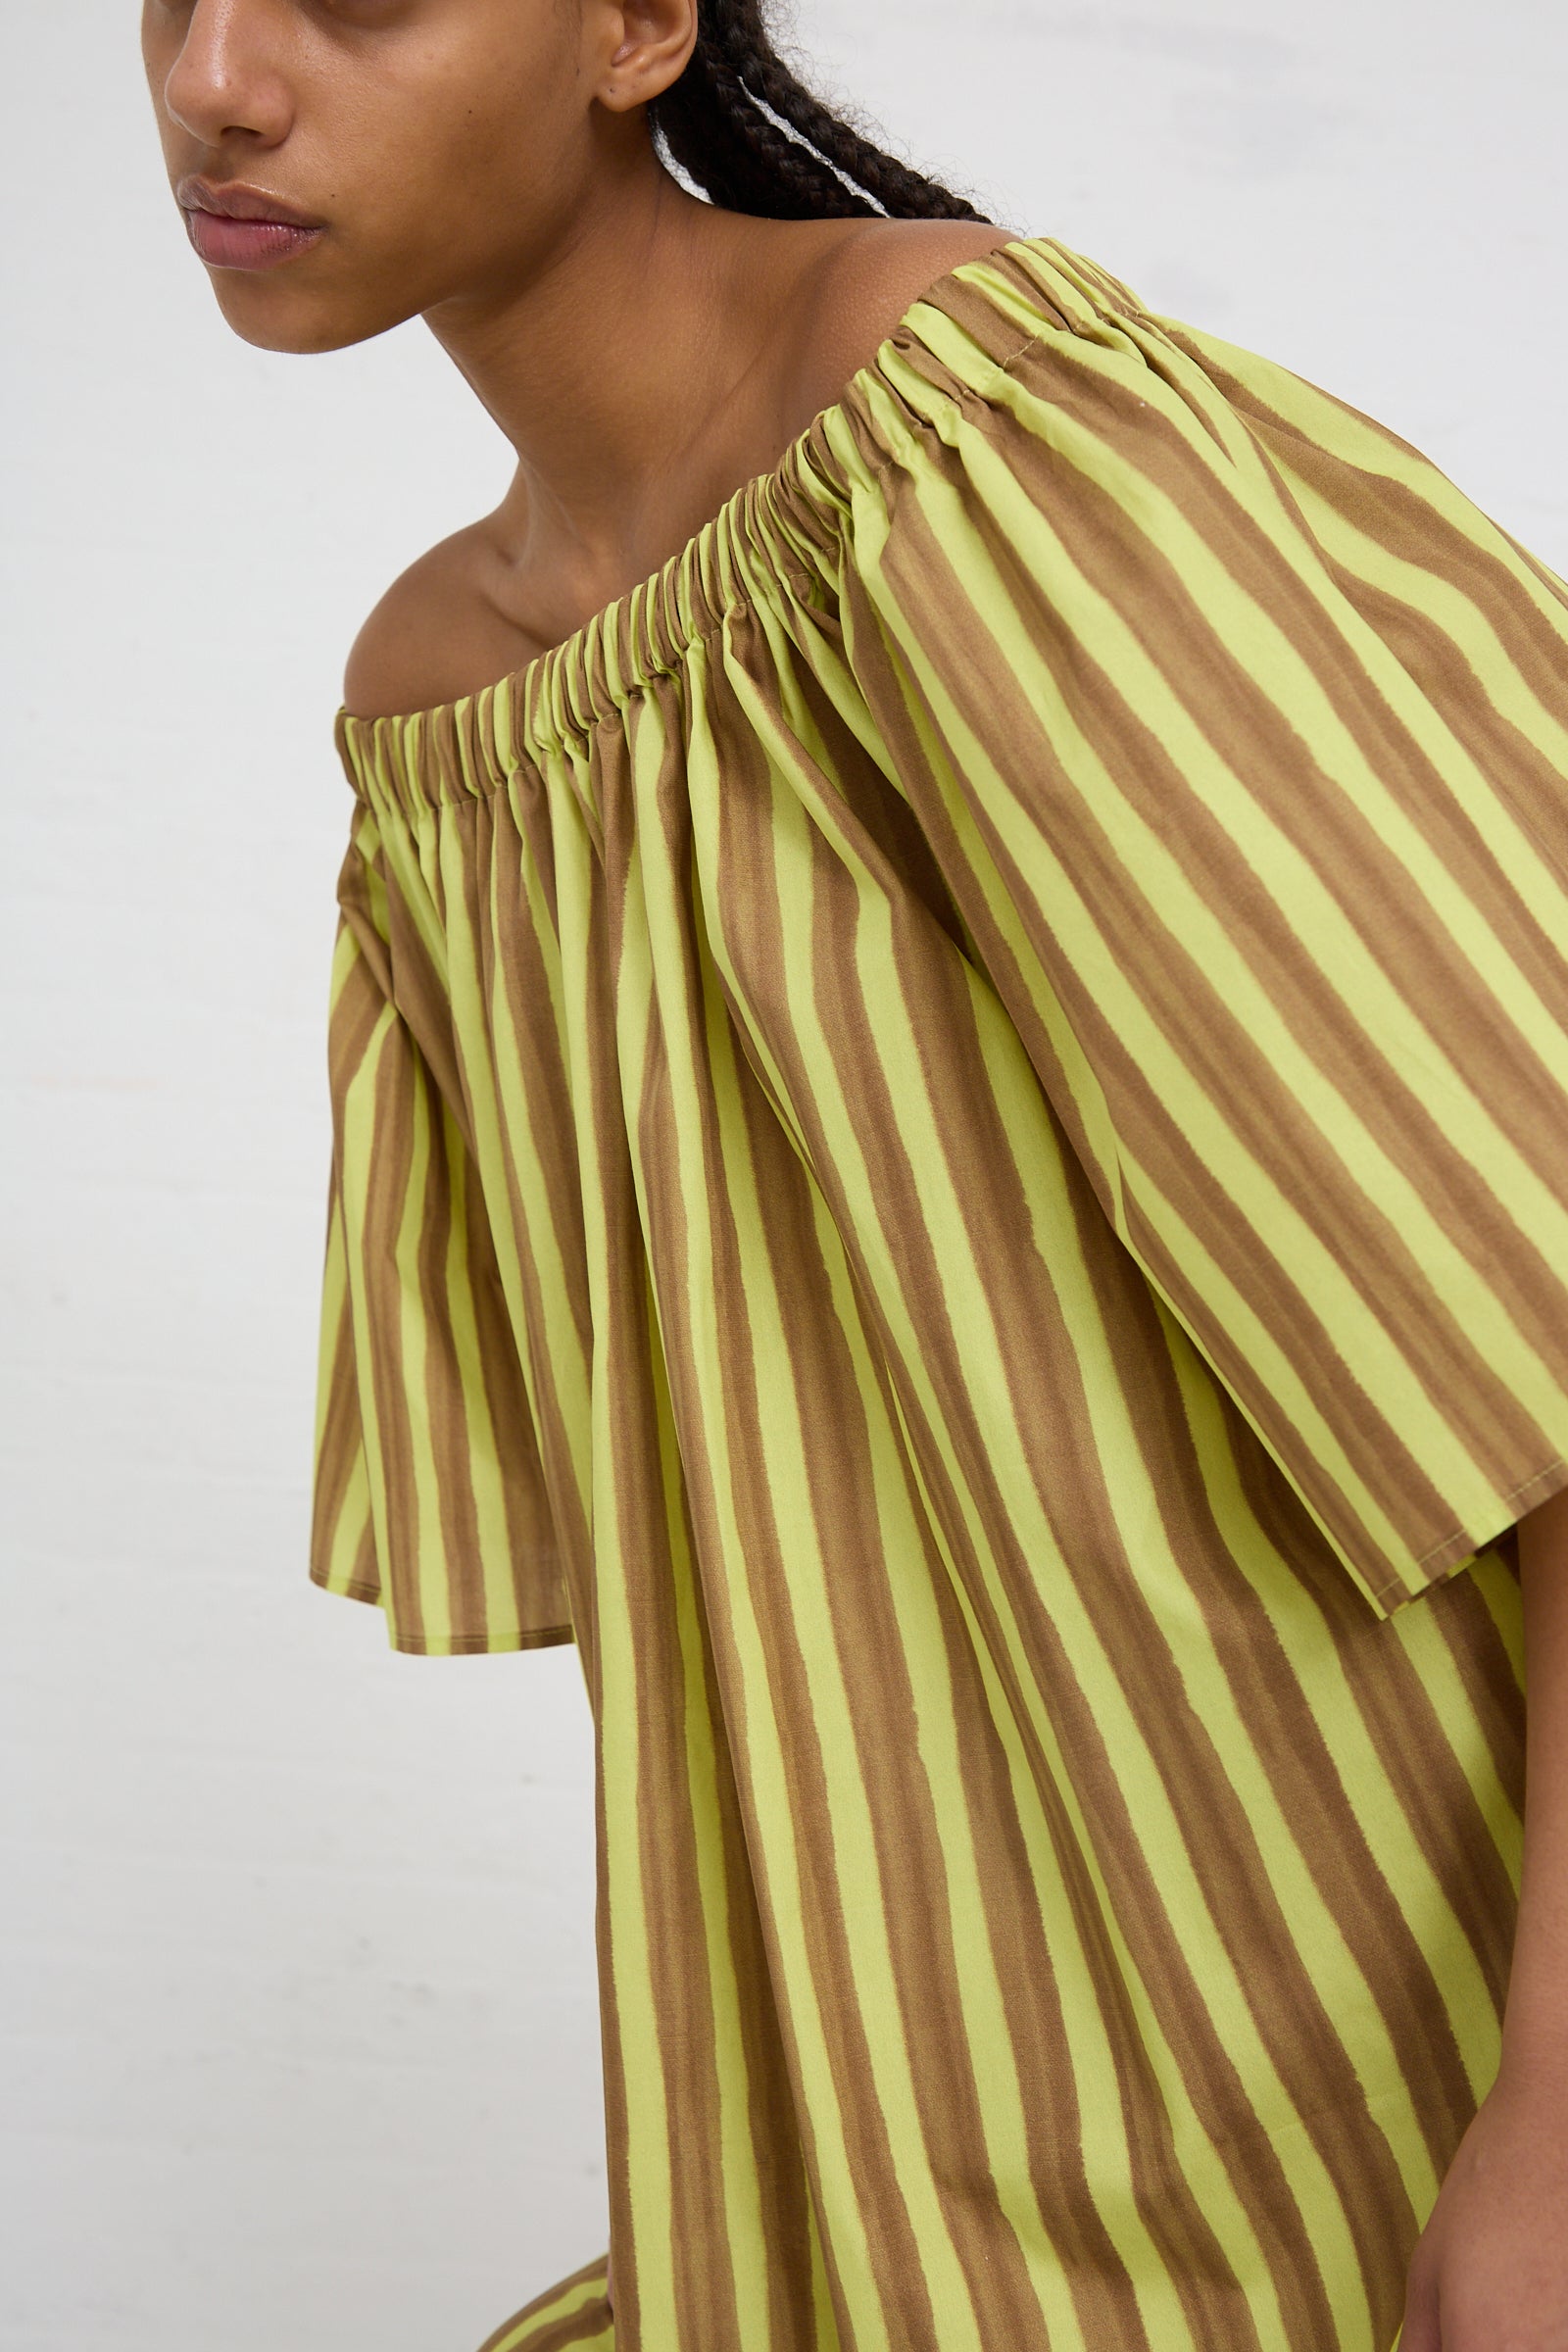 Woman wearing an AVN striped cotton maxi dress with gathered detailing in brown and yellow stripes.